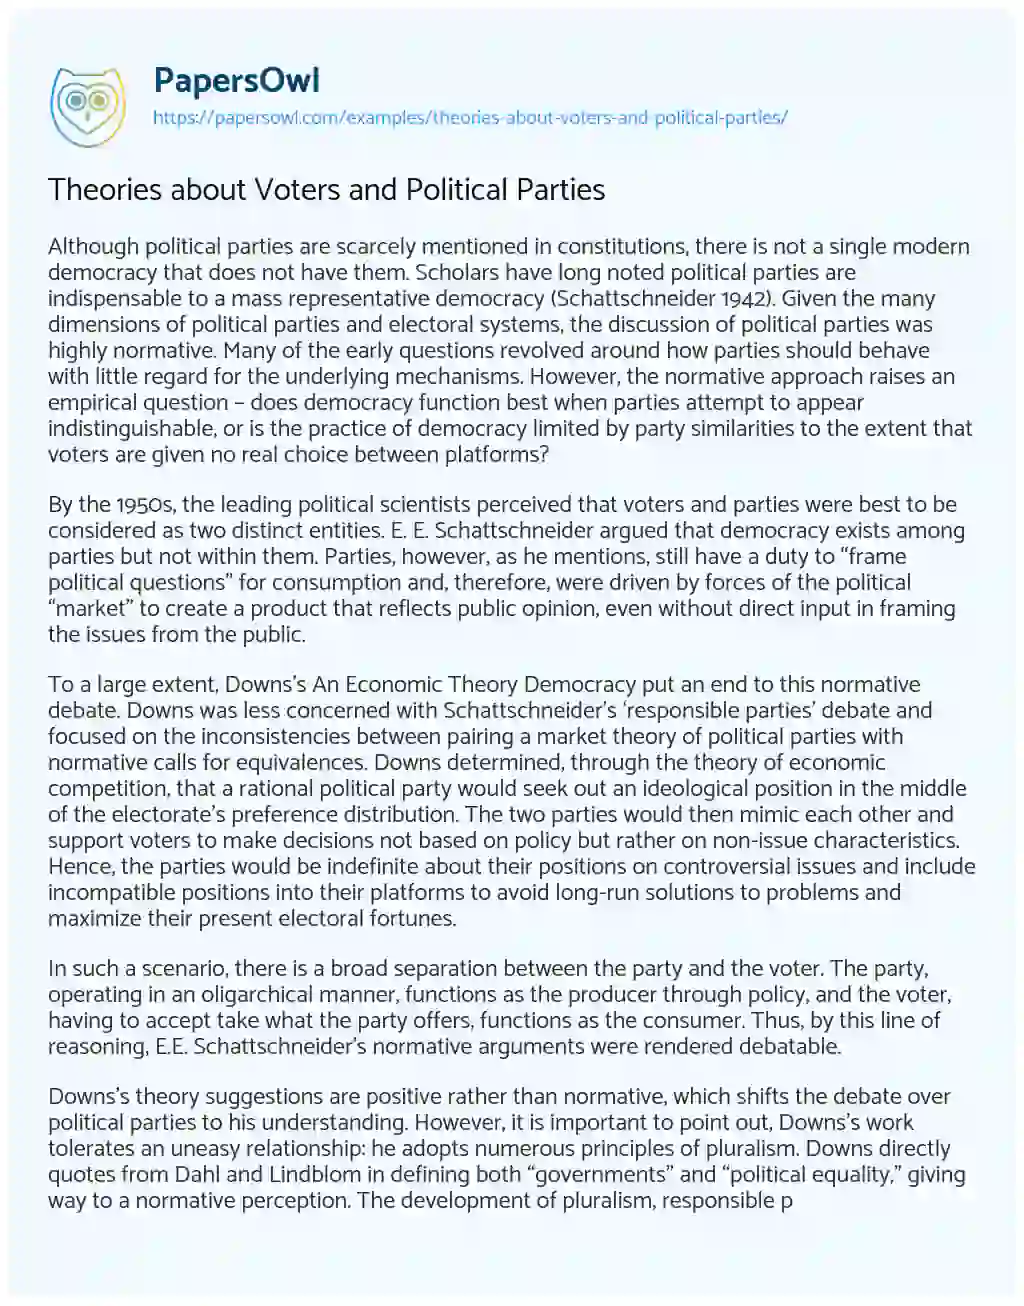 Essay on Theories about Voters and Political Parties